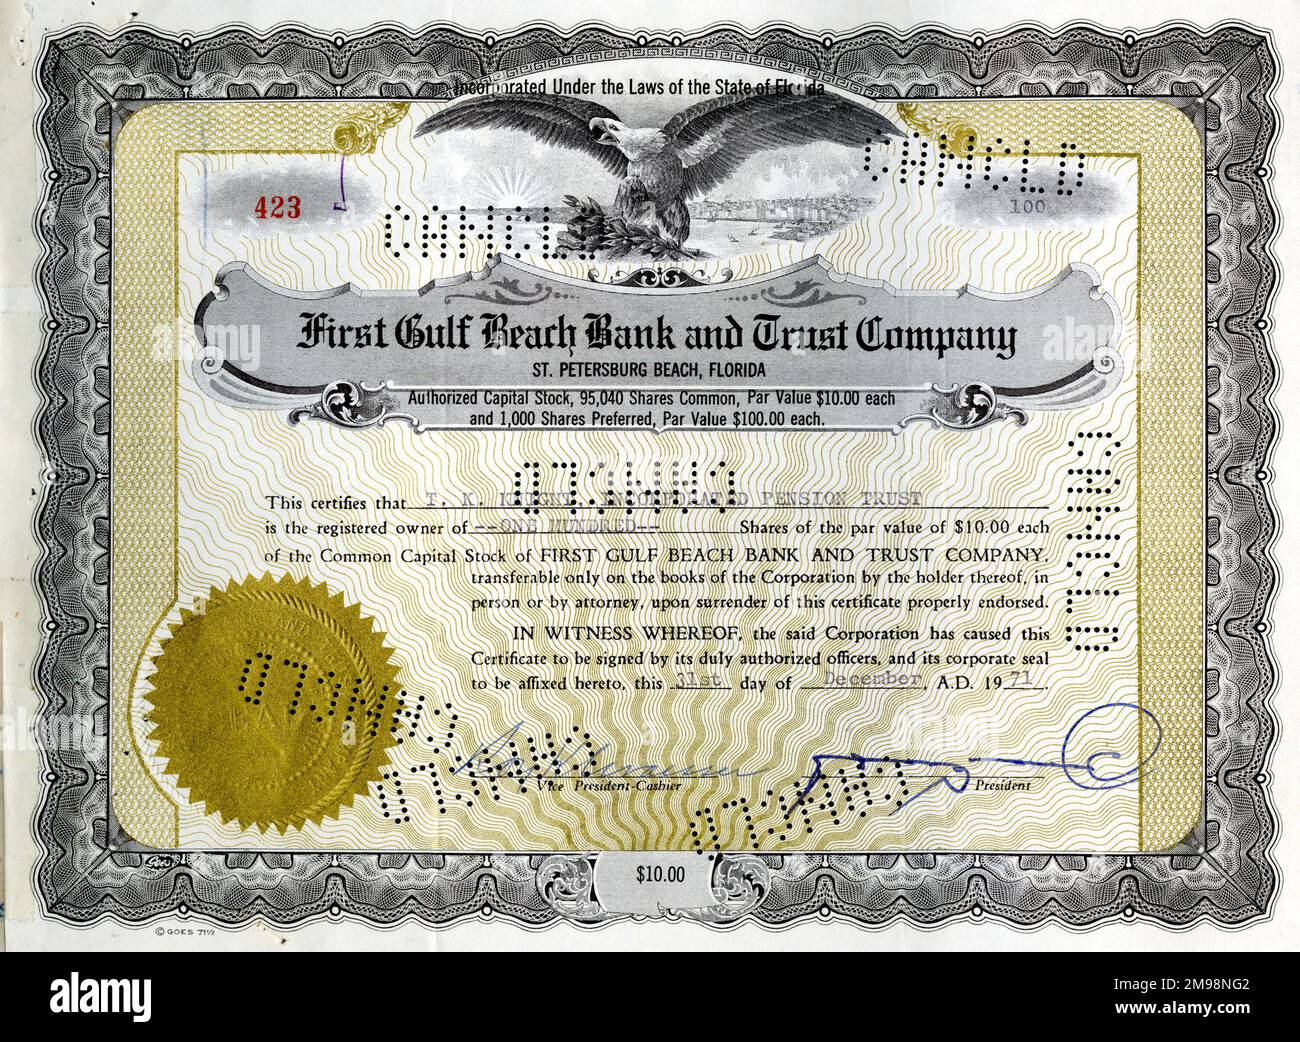 Stock Share Certificate - First Gulf Beach Bank and Trust Company, St Petersburg Beach, Florida, USA, 100 shares. Stock Photo